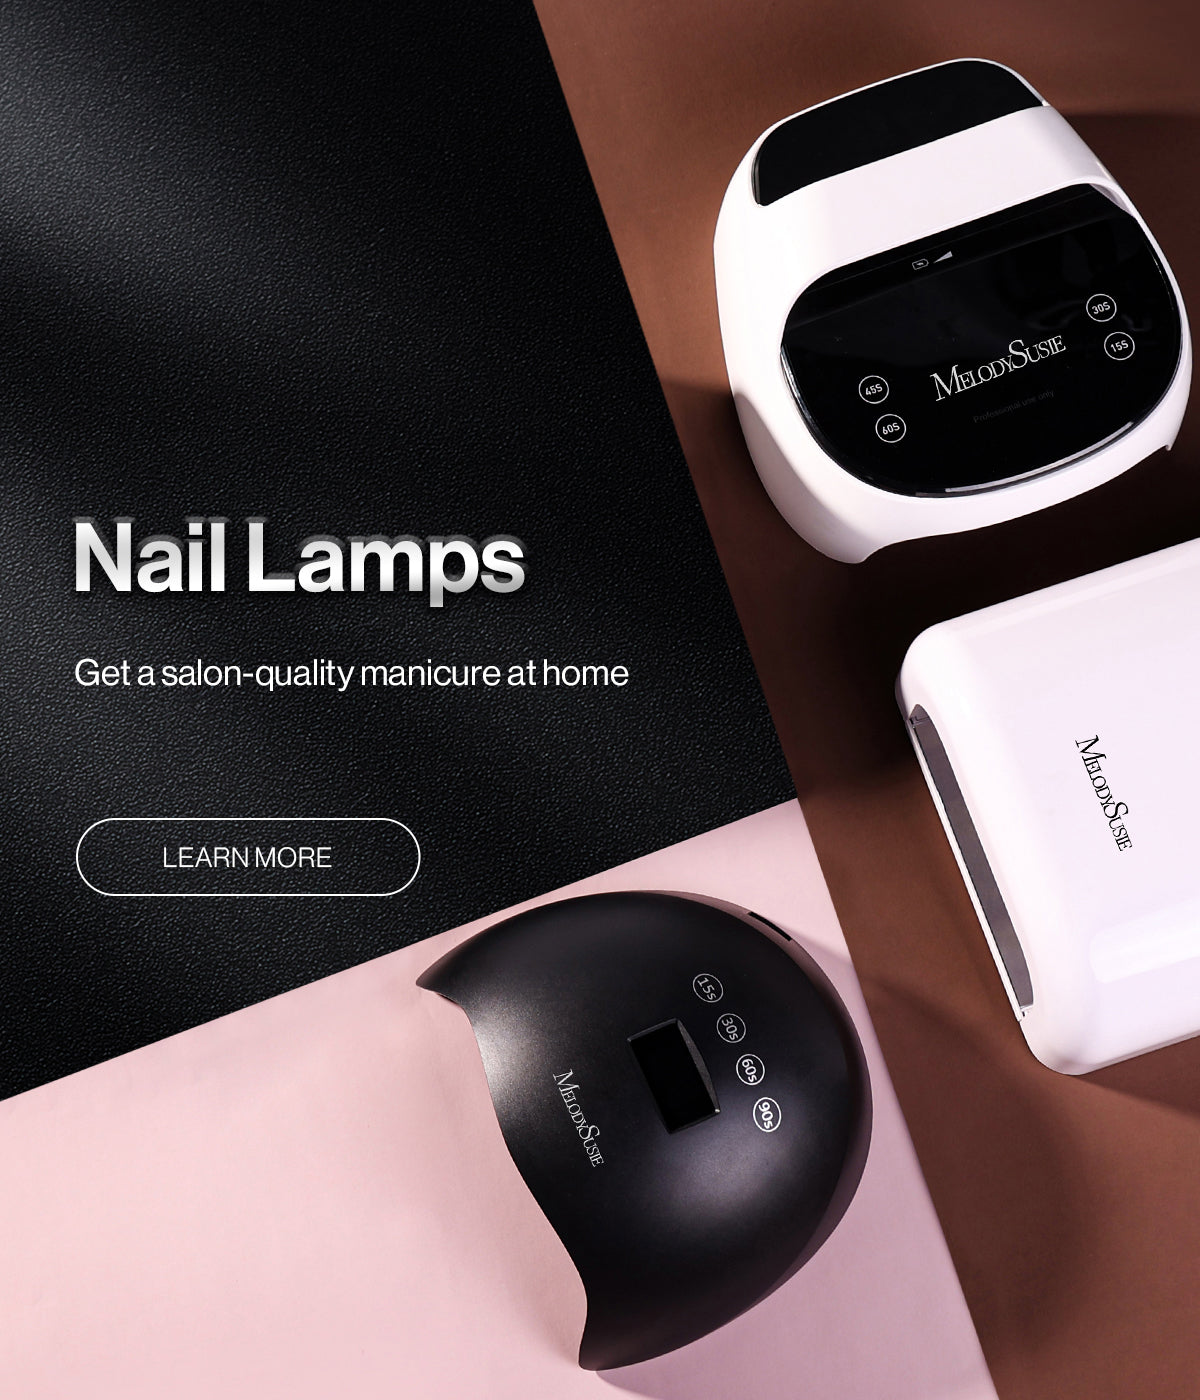 Professional Nail lamps for salon owners and beginners